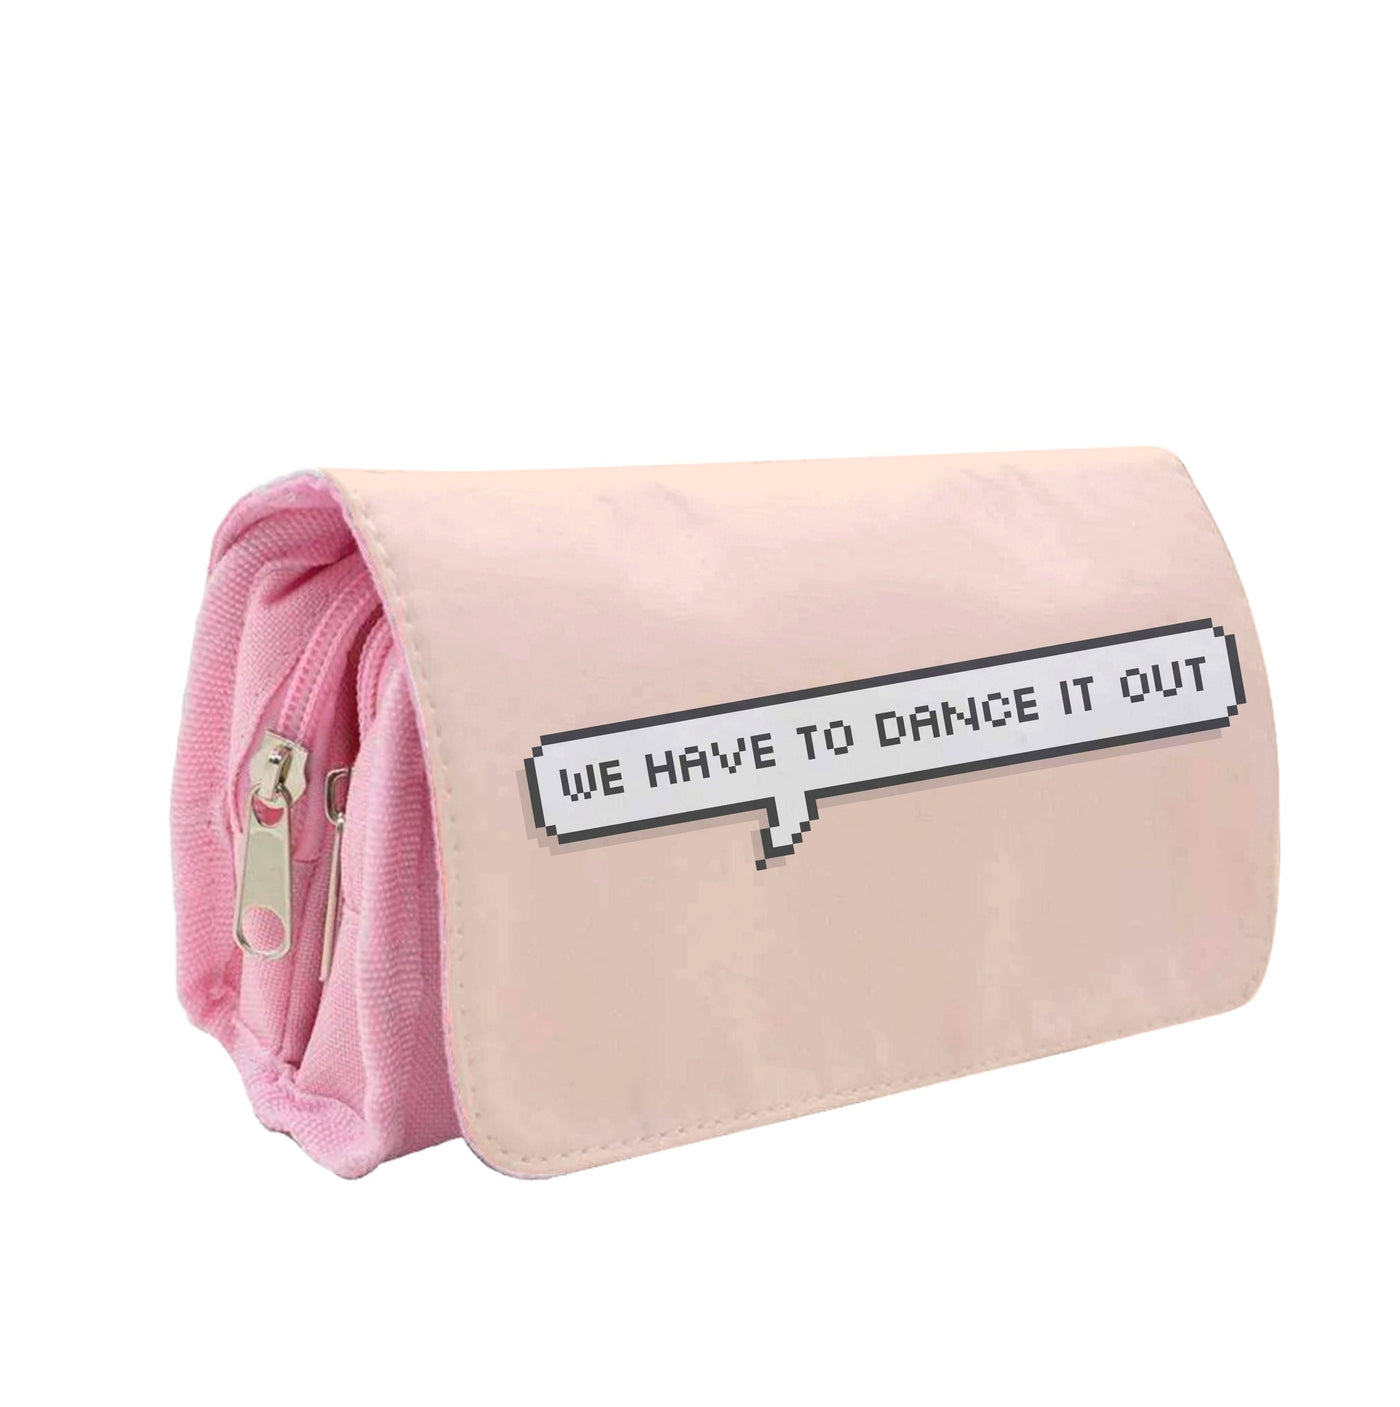 We Have To Dance It Out - Grey's Anatomy Pencil Case